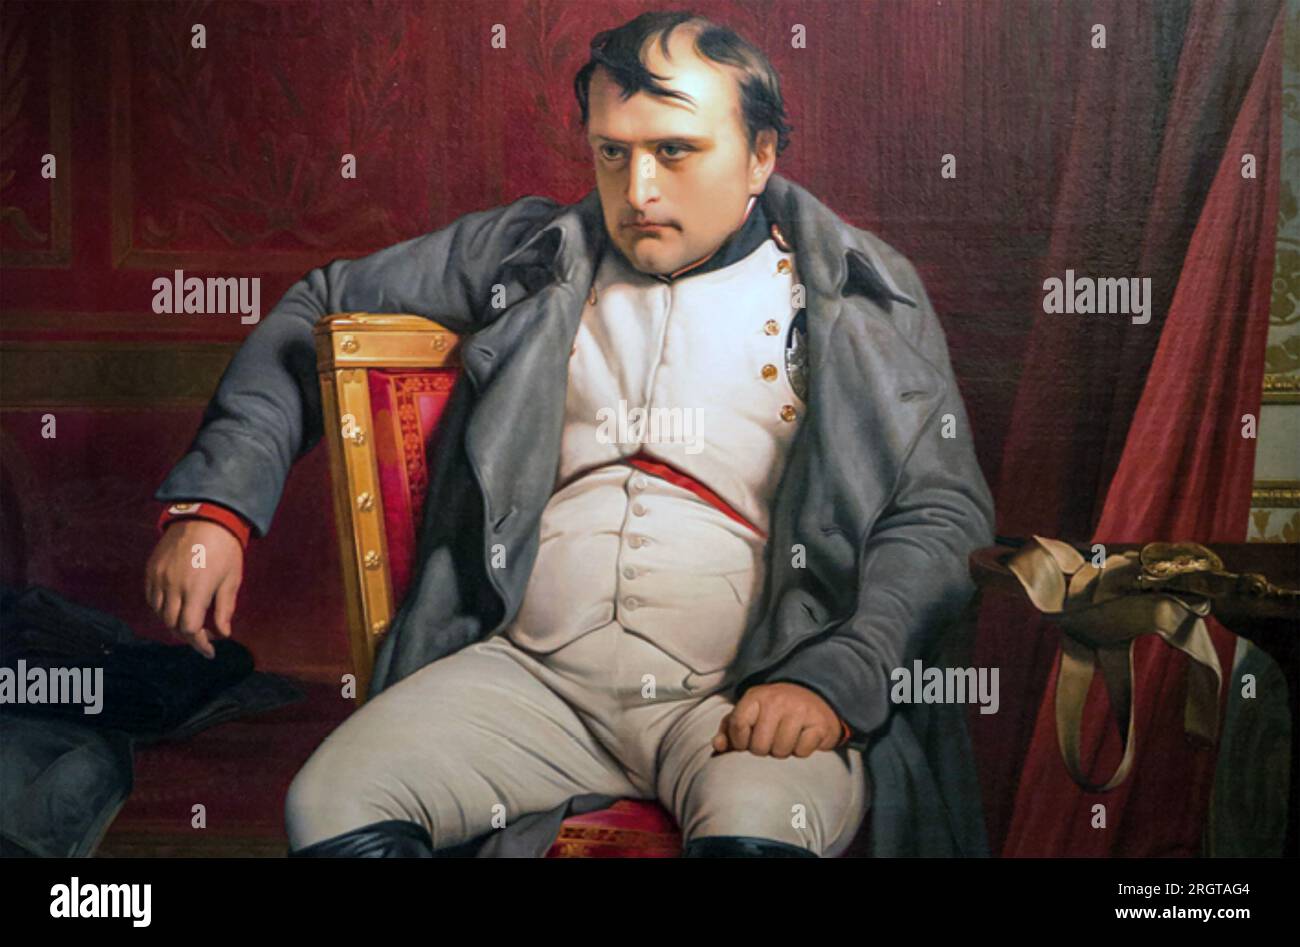 NAPOLEON BONAPARTE (1769-1821) at Fontainebleau n 4 April 1814 after his abdication. Painting by Paul about 1845 Delaroche Stock Photo